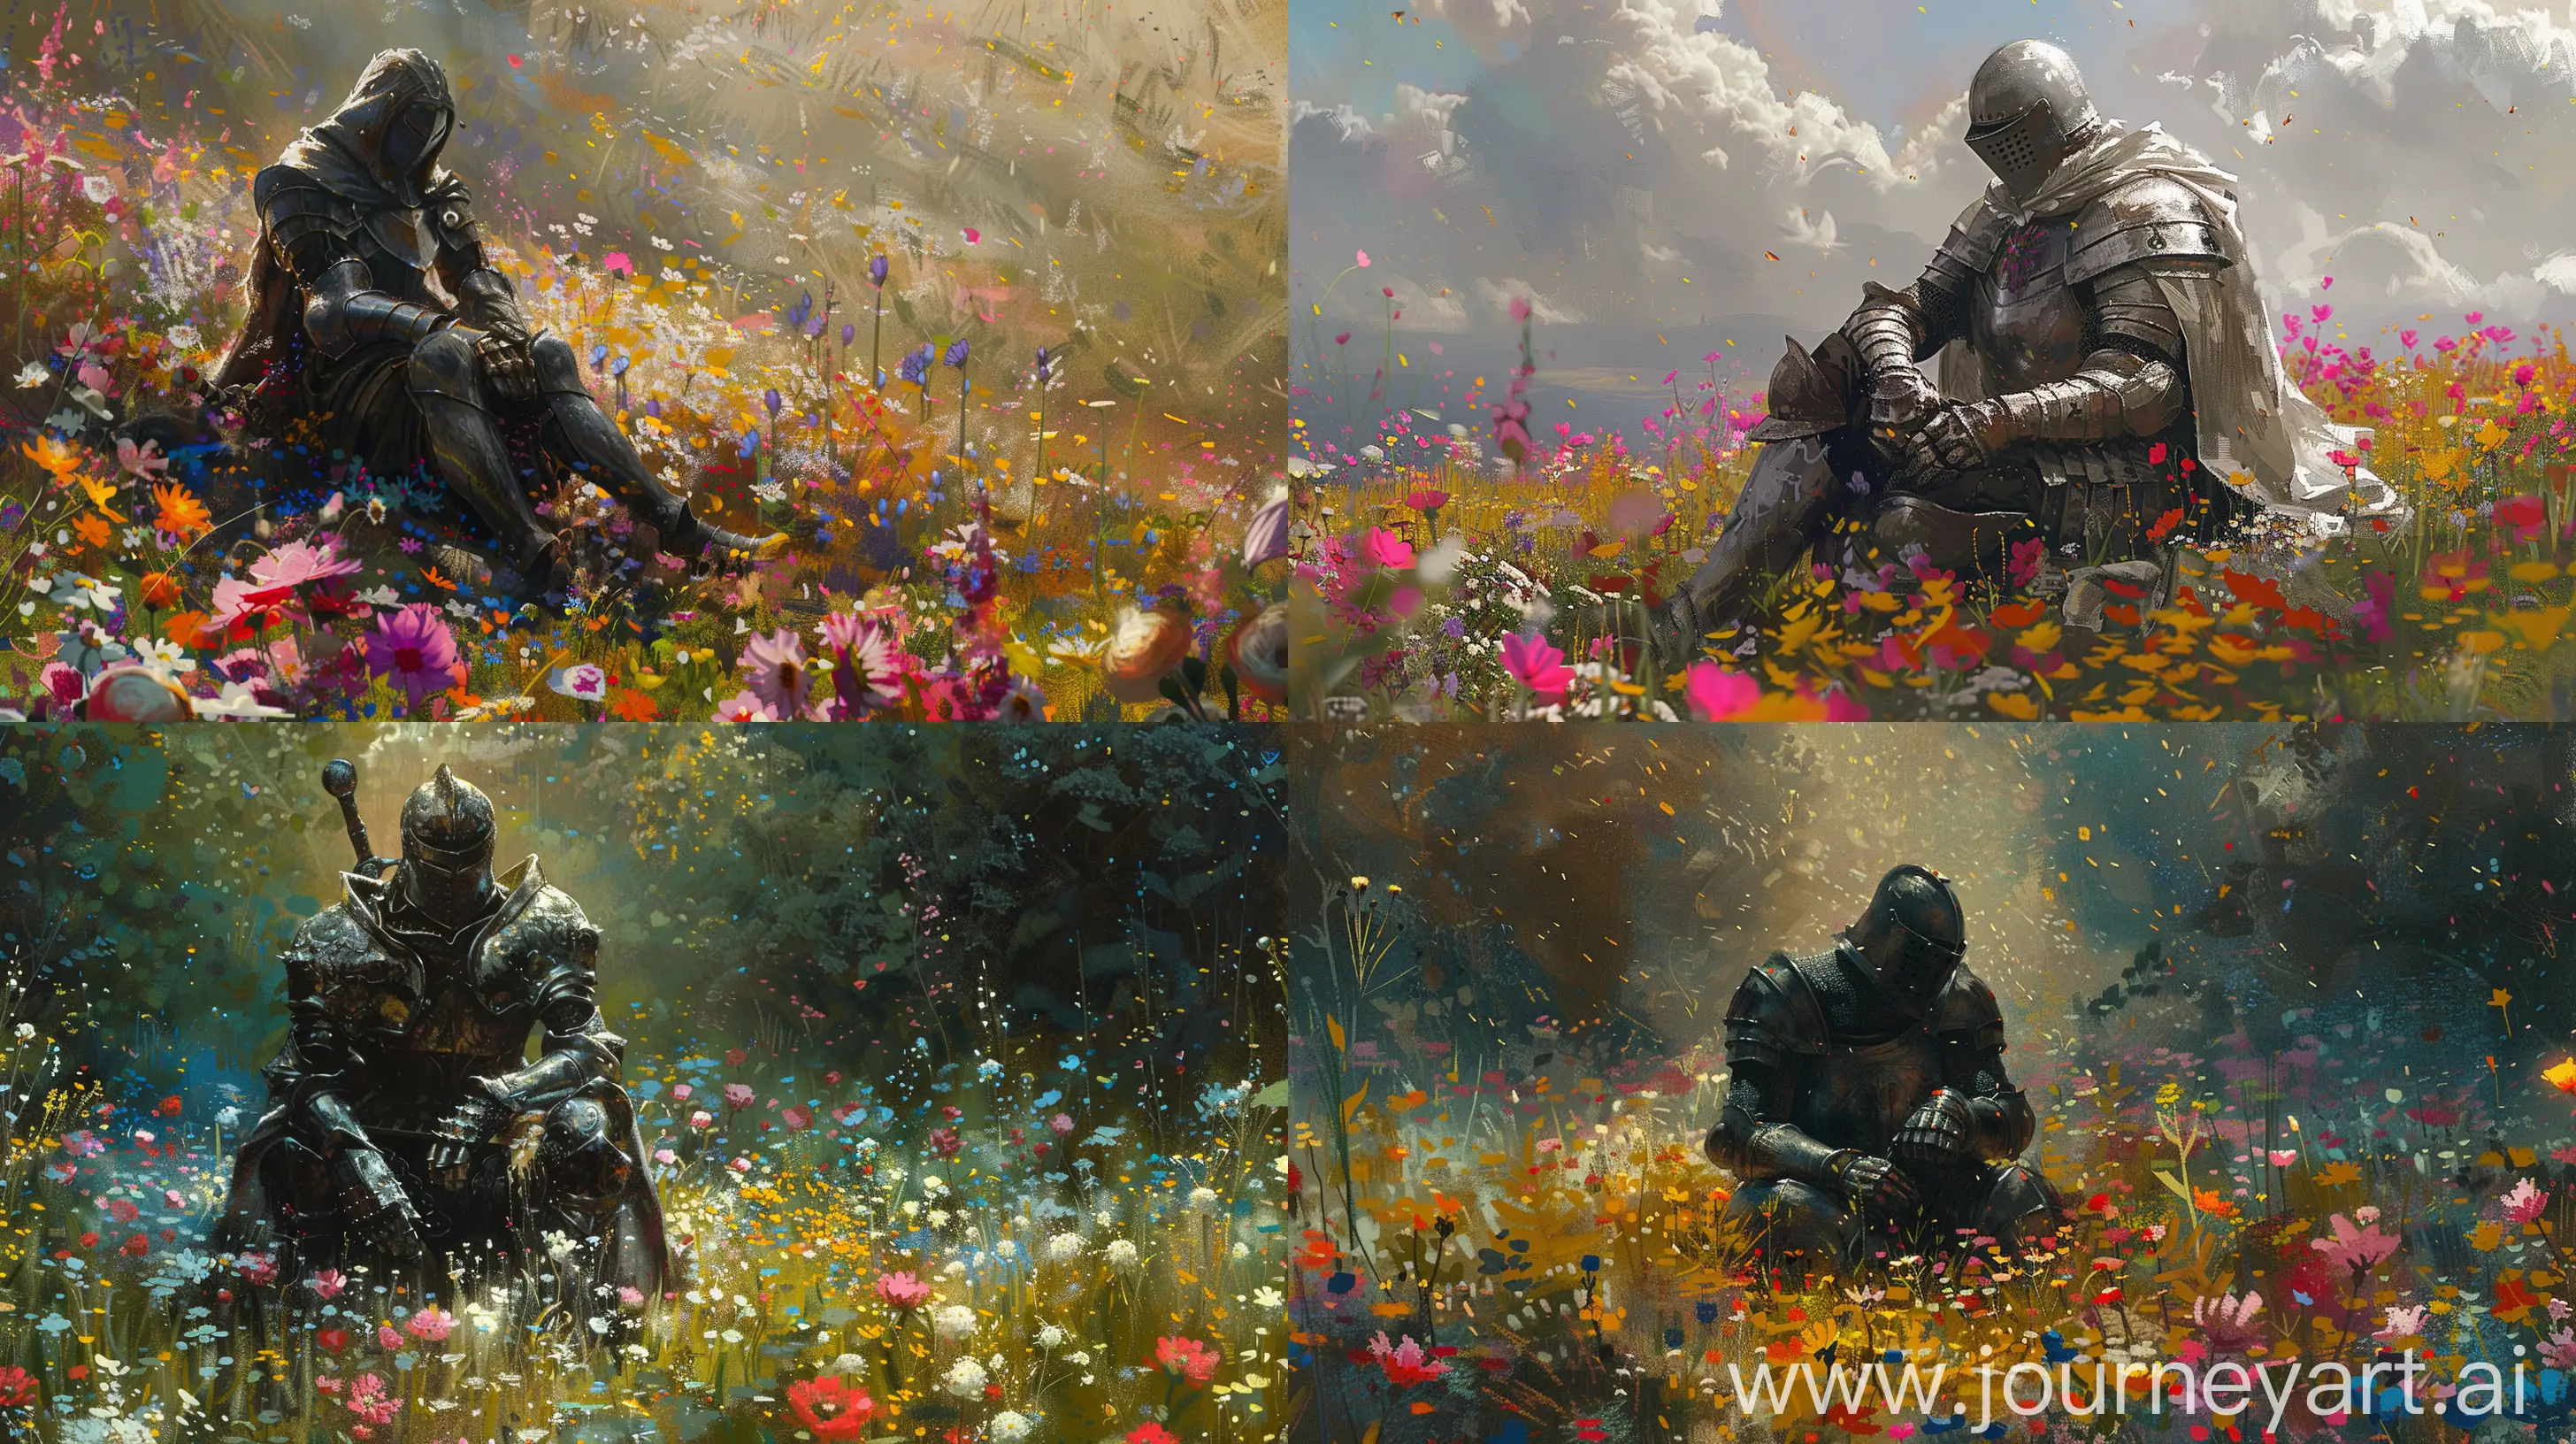 Knight-Seated-Amidst-a-Vibrant-Flower-Field